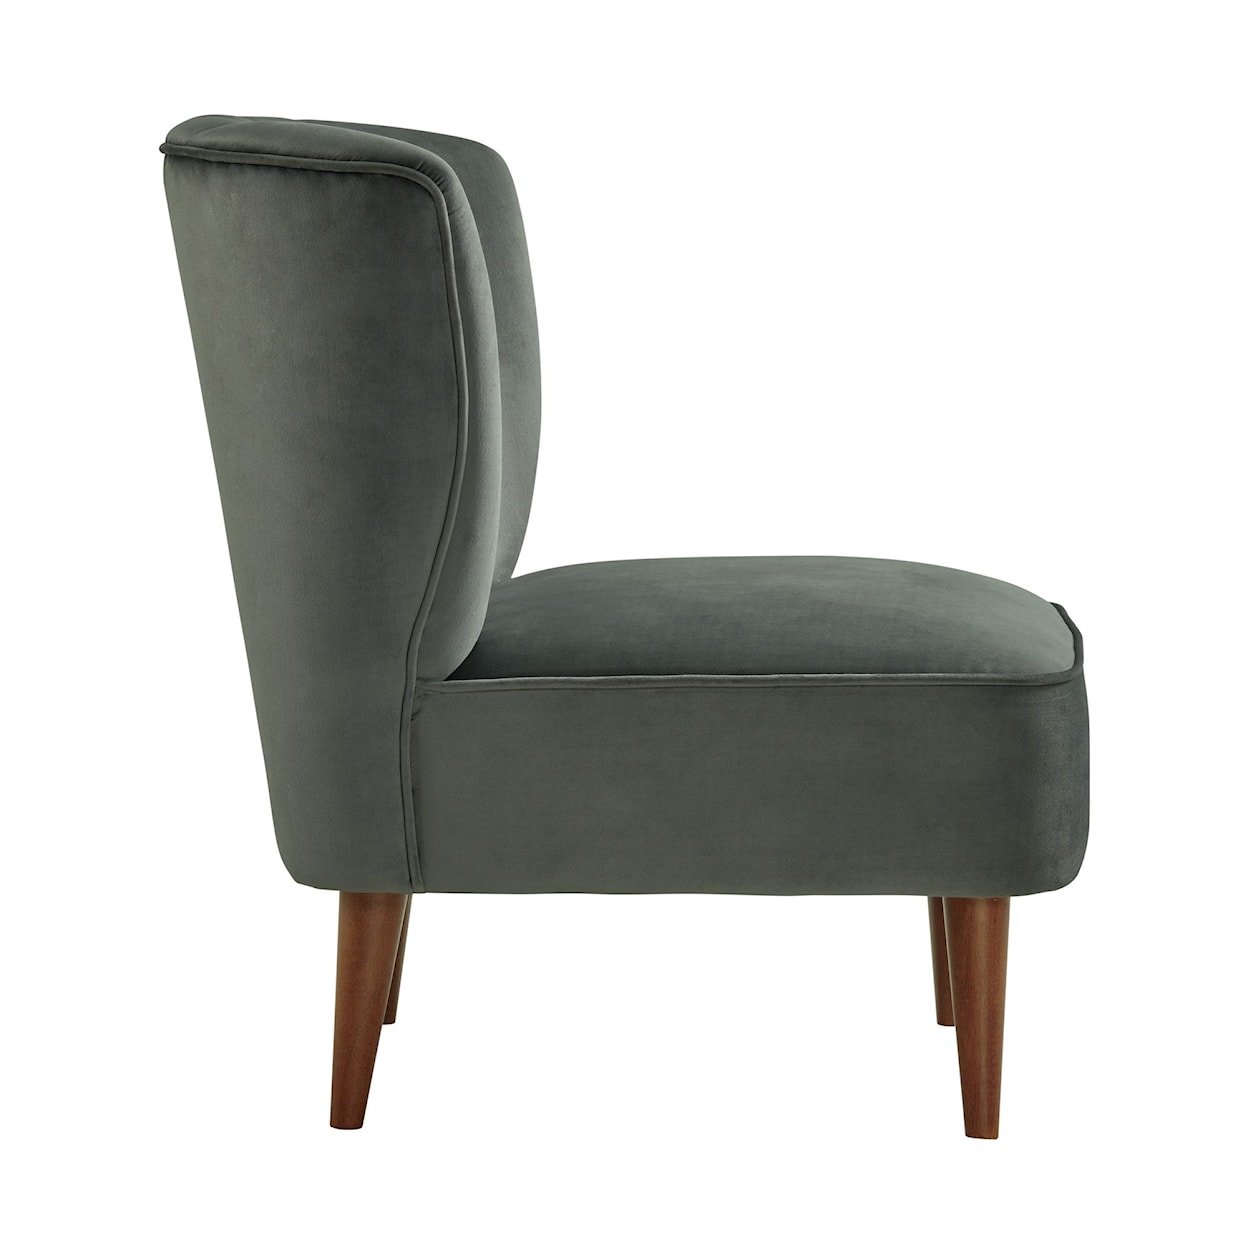 Elements International Joss Channel Upholstered Accent Chair